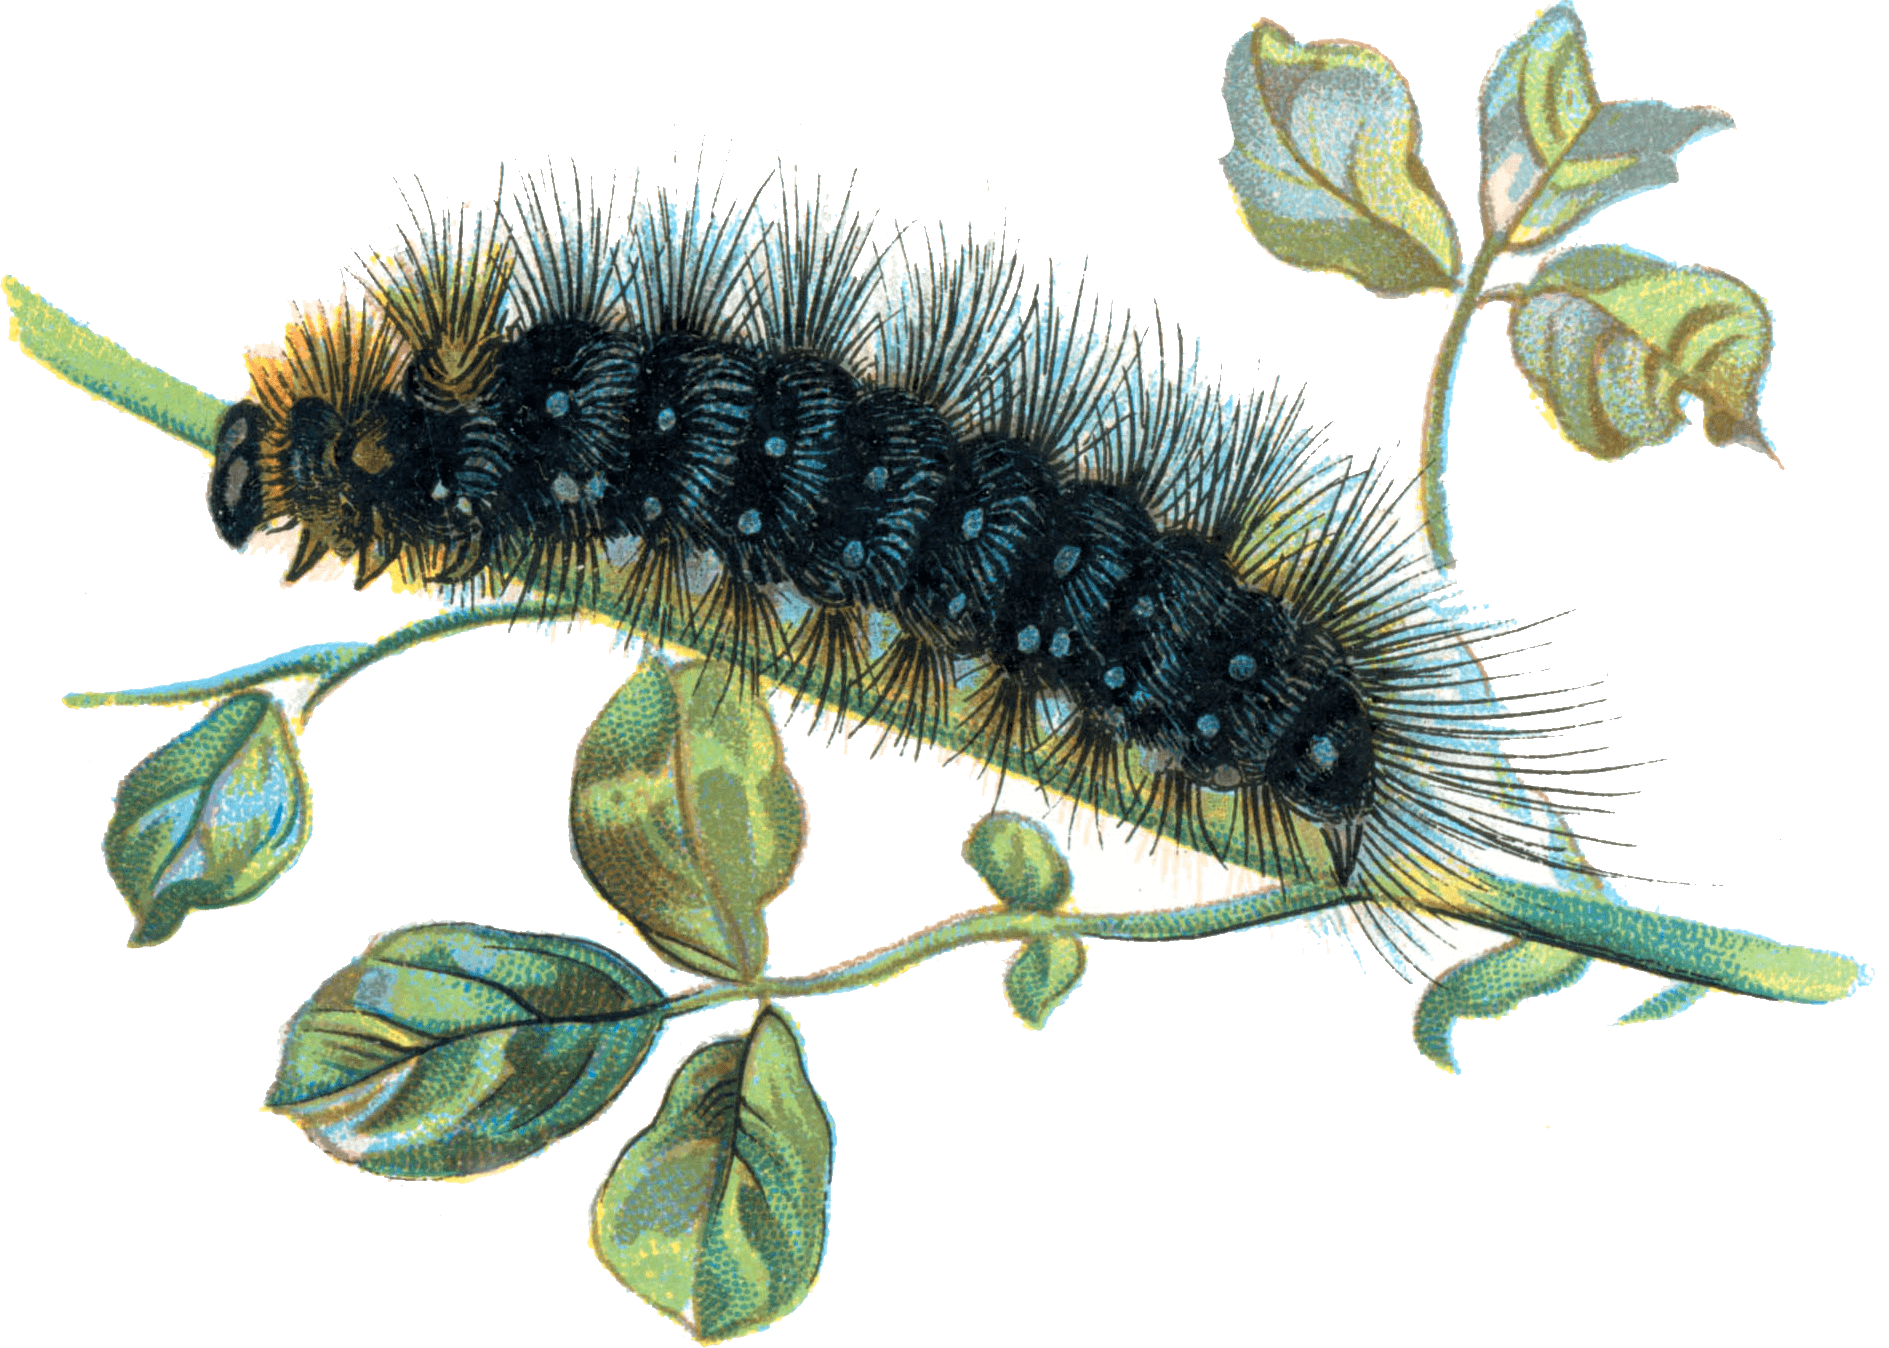 Caterpillar On Branch - Very Hungry Caterpillar, Transparent background PNG HD thumbnail